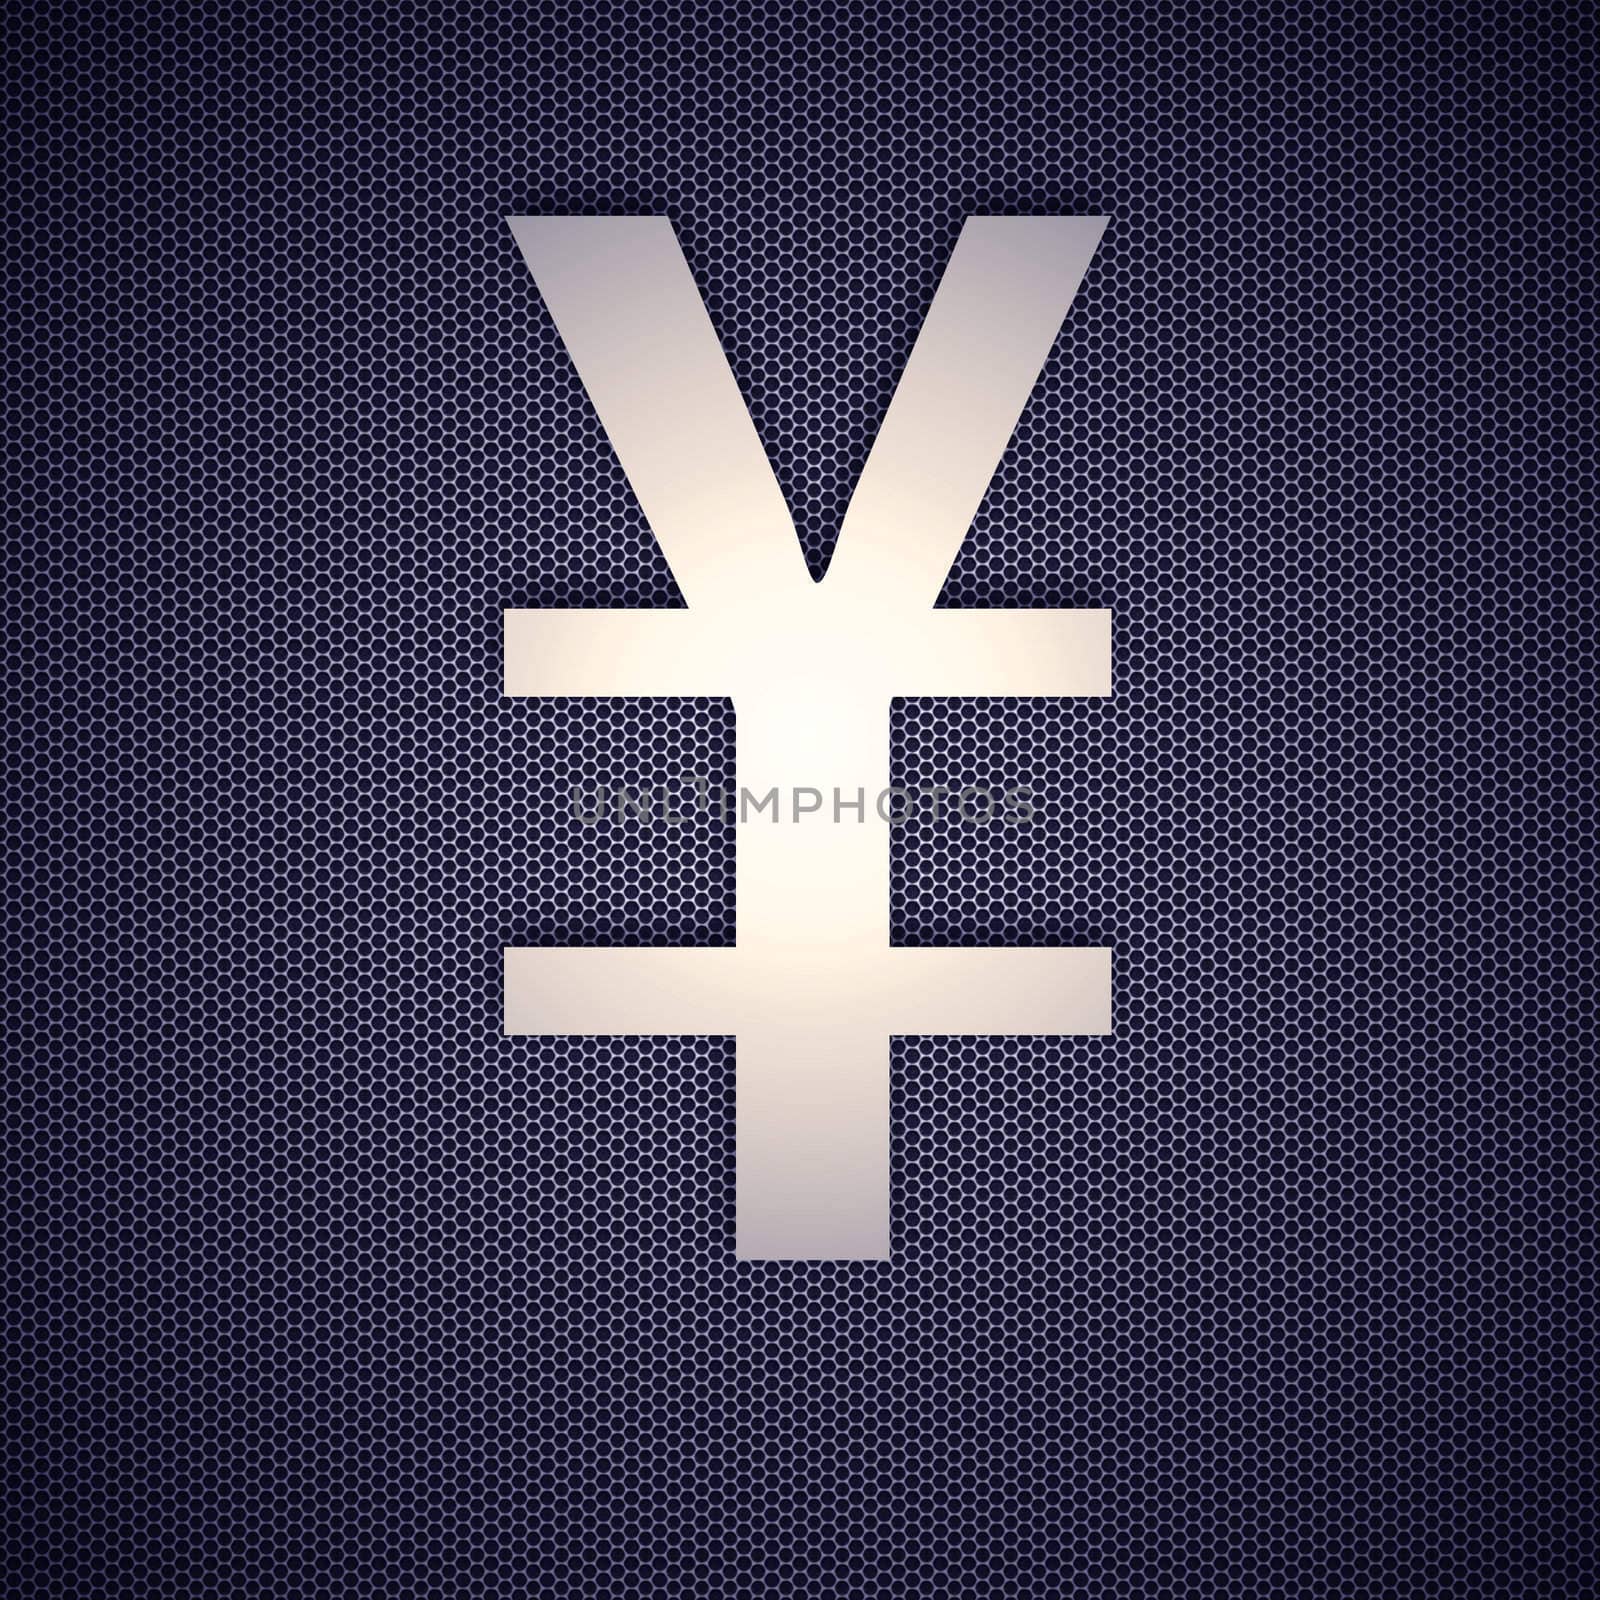 metal symbol yen isolated on metal background. High resolution image.